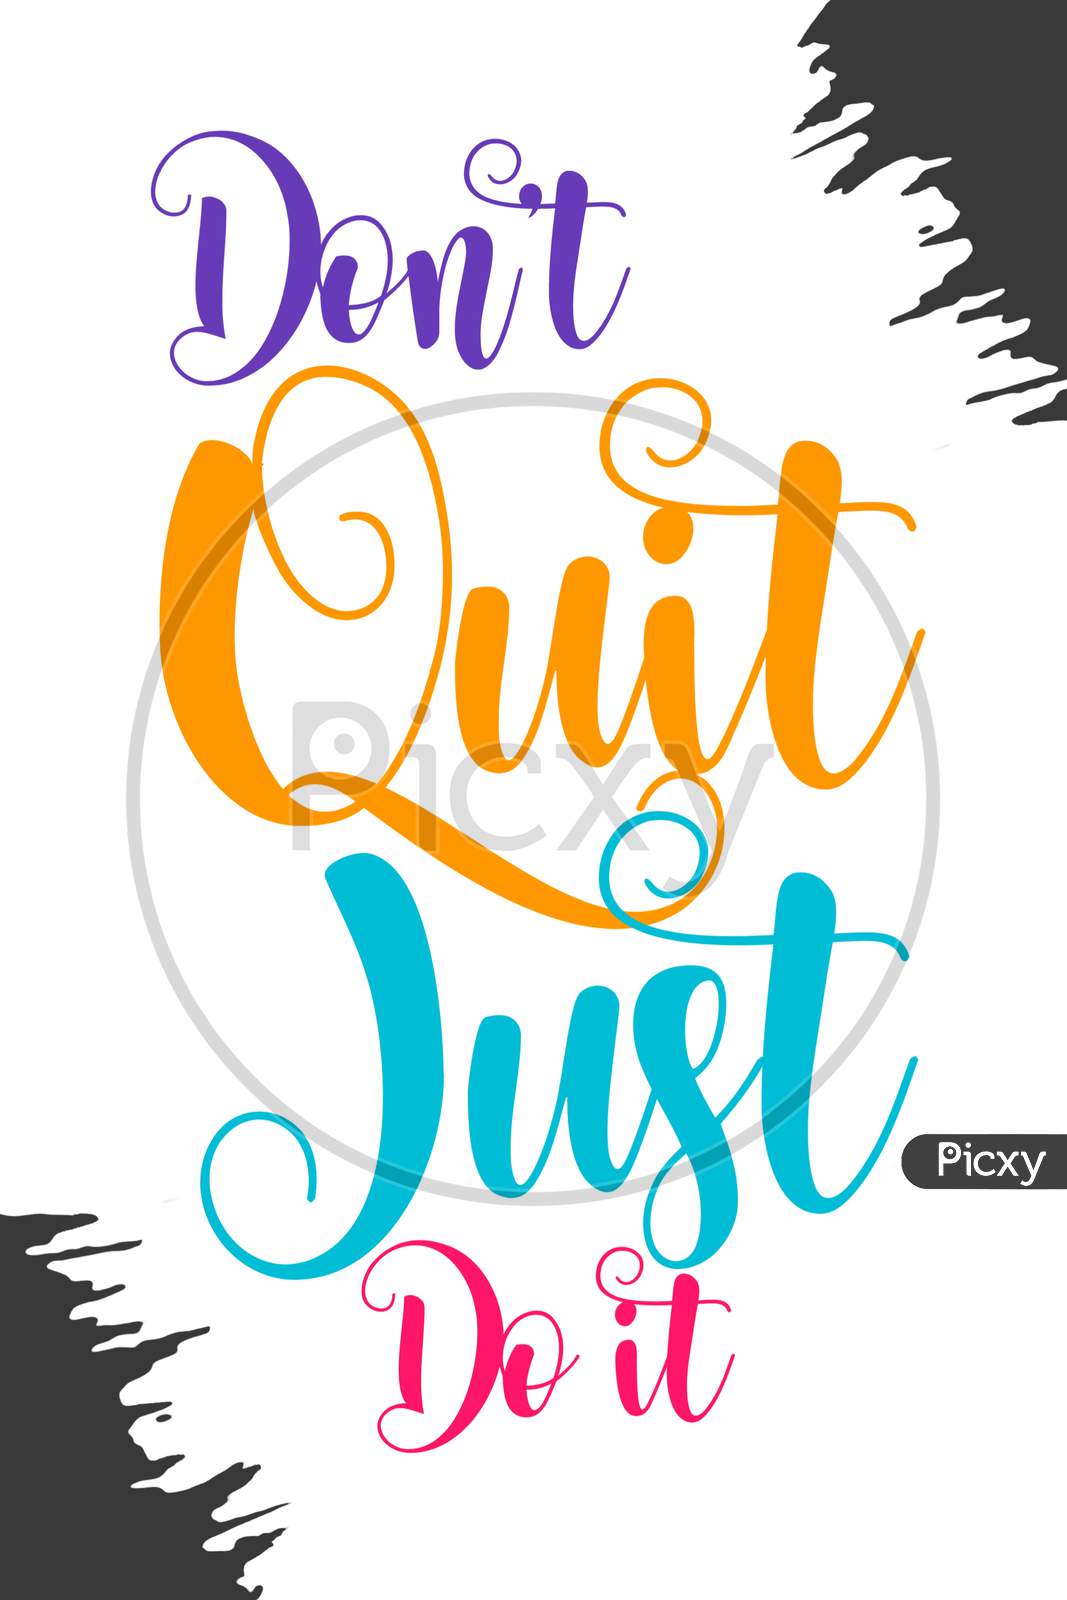 Don't Quit Just Do It (white background with colorful fonts)